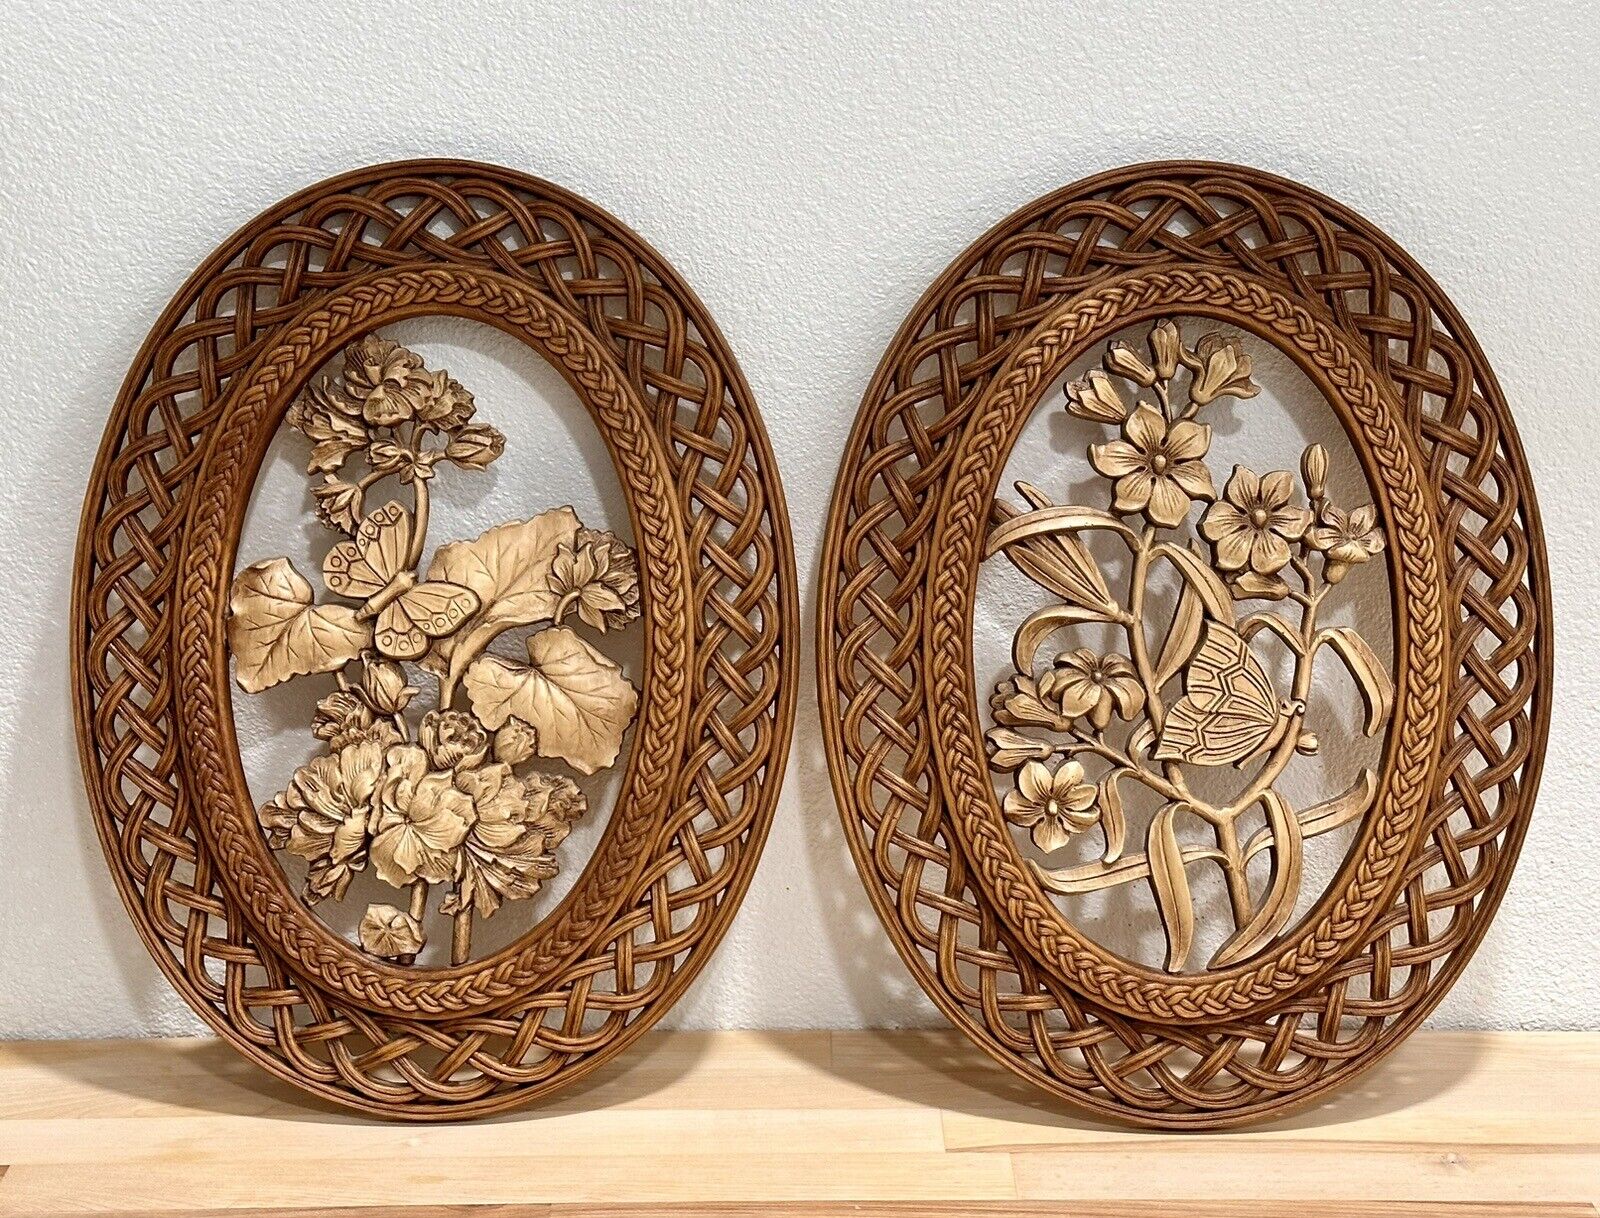 Vintage Pair 1970s Syroco Wall Plaques Hanging Decor Floral Braided Frame Design